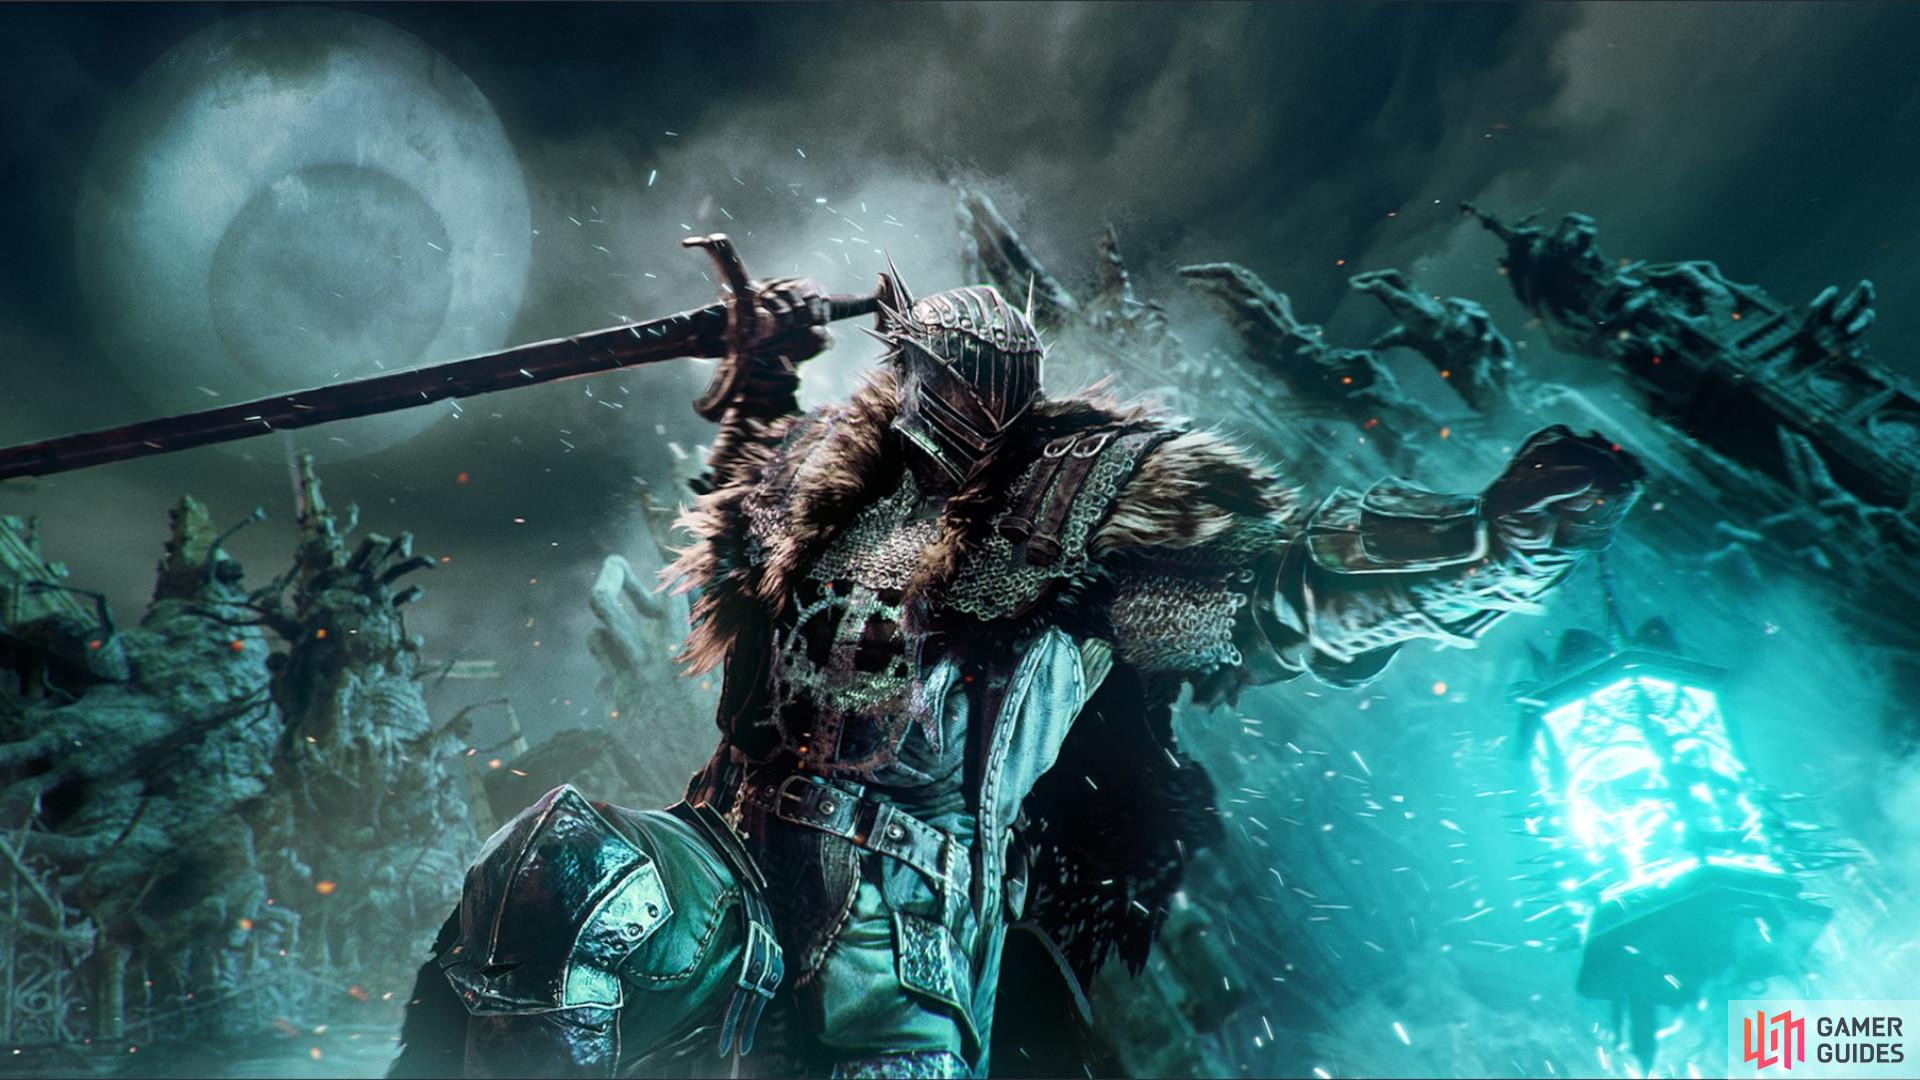 Lords of the Fallen Is Getting 12 New Spells, Several New Questlines and  More Free Stuff Before 2023's End